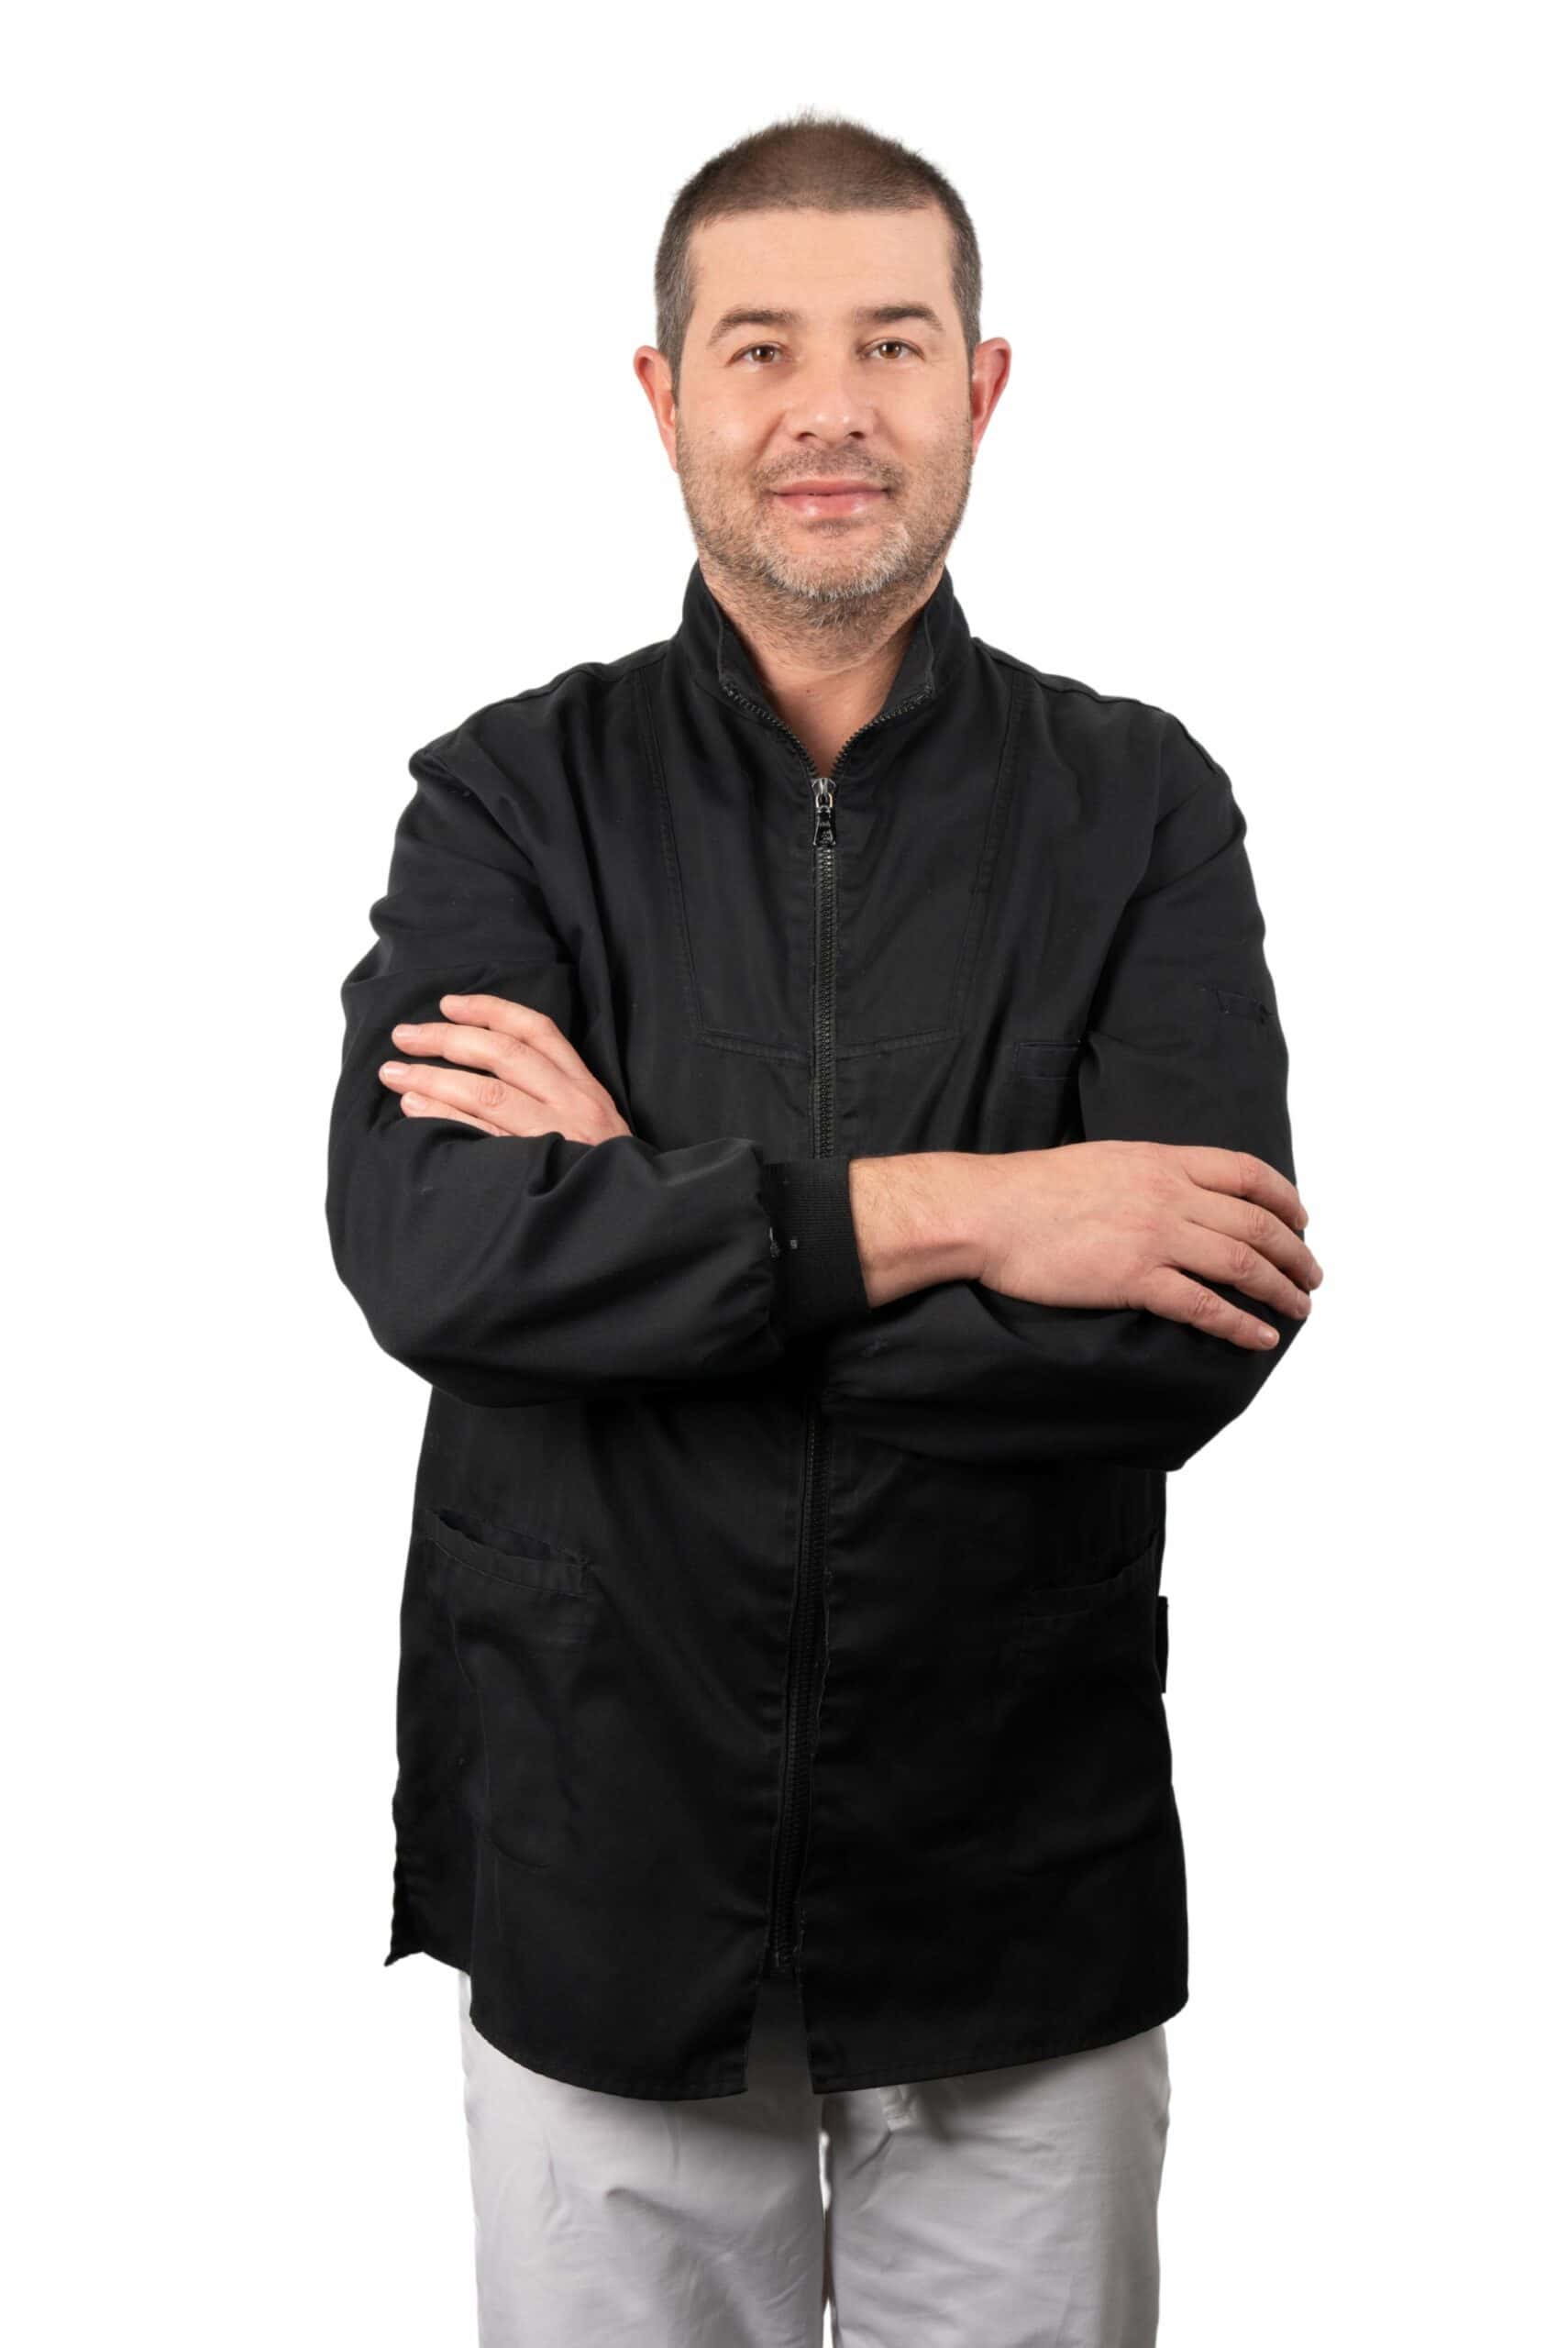 A man in a black jacket and gray pants stands with arms crossed, smiling at the camera, isolated on a white background for Dentalmed Group.